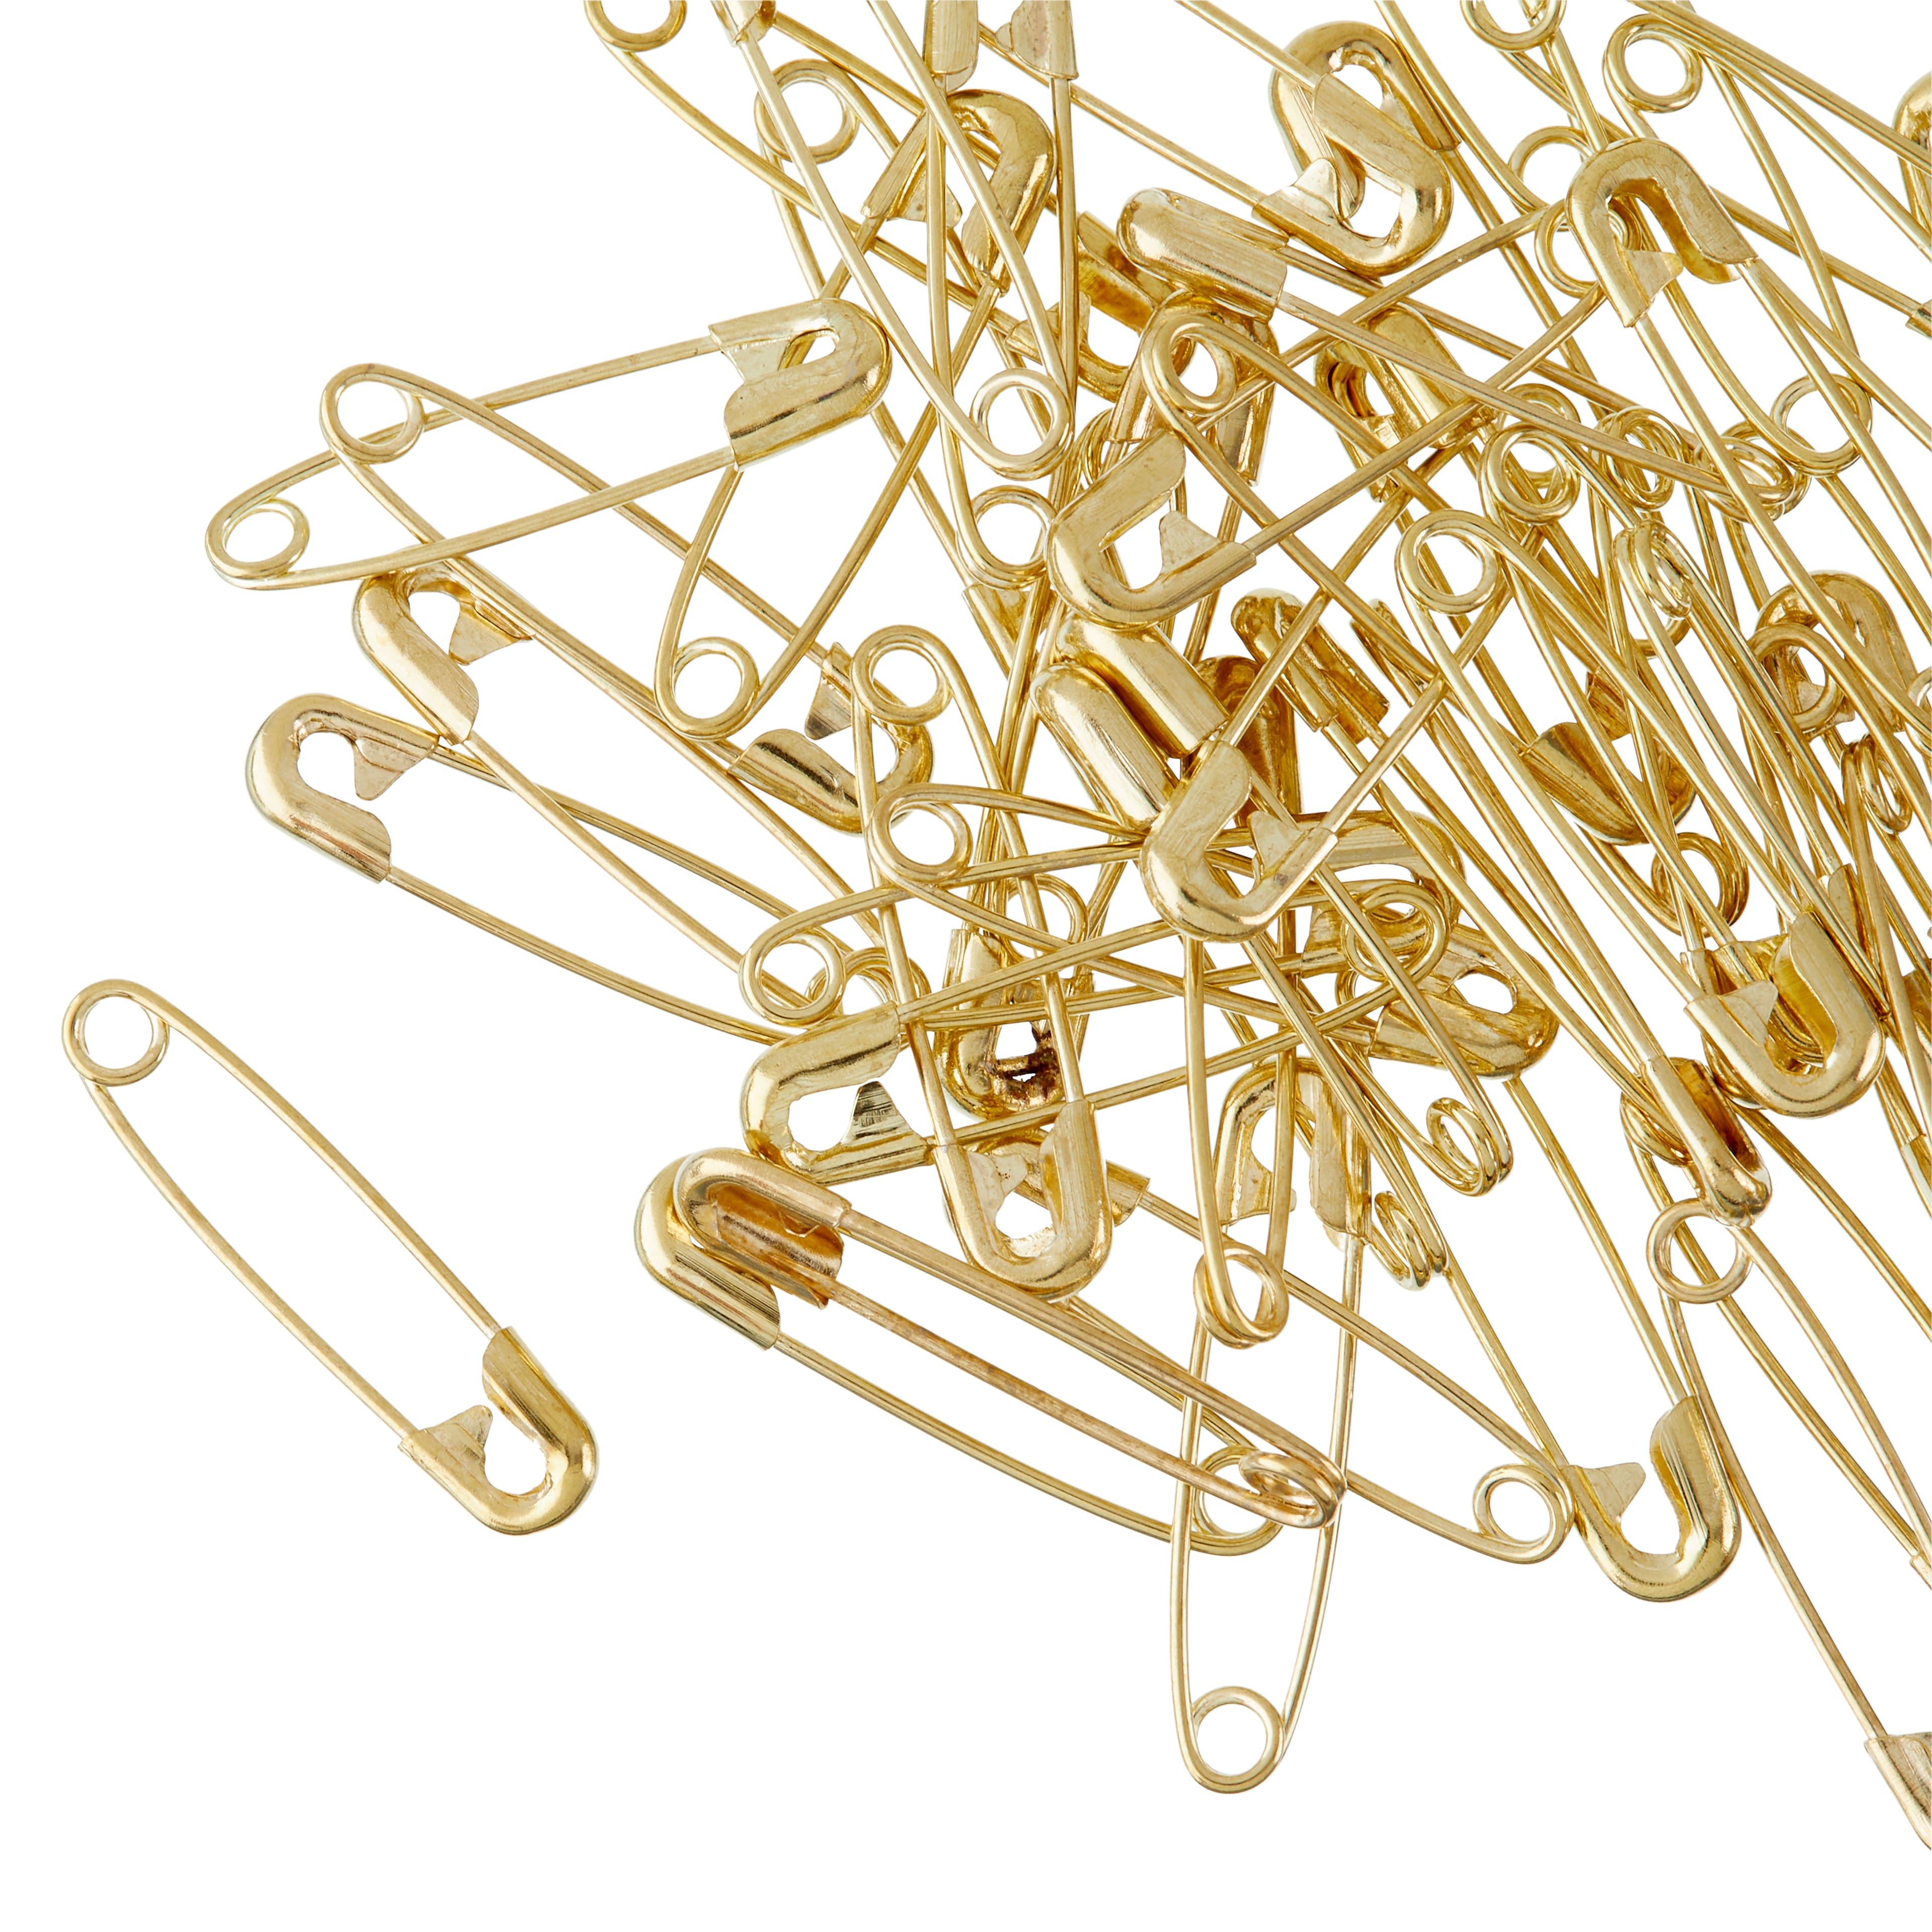 Loops & Threads Medium Silver & Gold Assortment Safety Pins - 225 ct